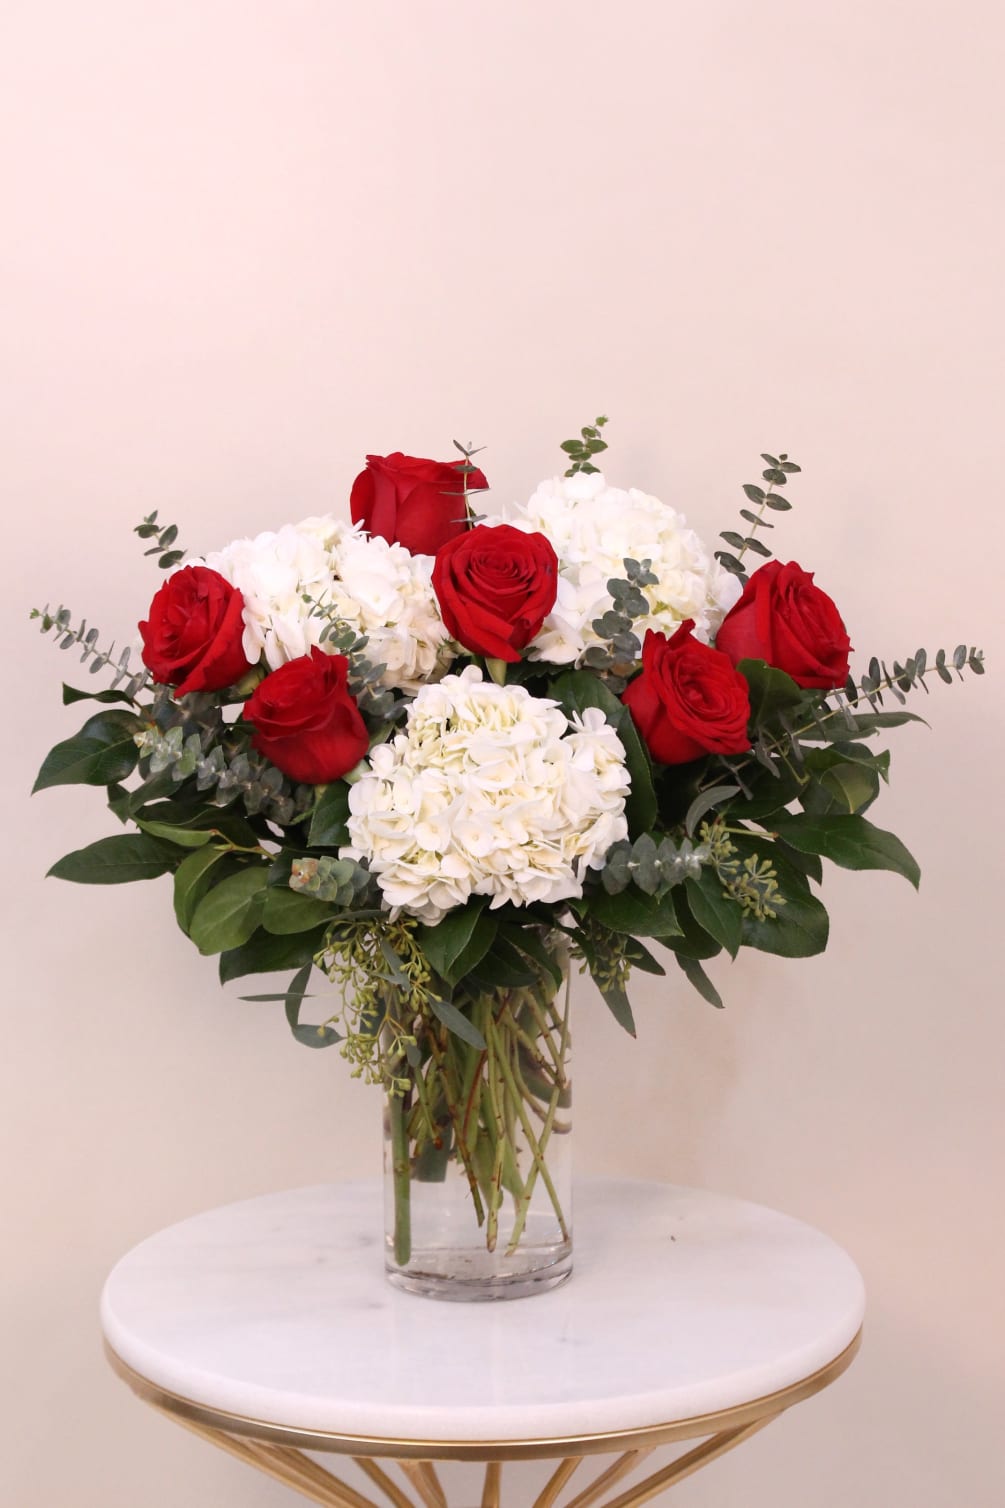 Half dozen of red roses with hydrangeas and mixed foliage arranged in